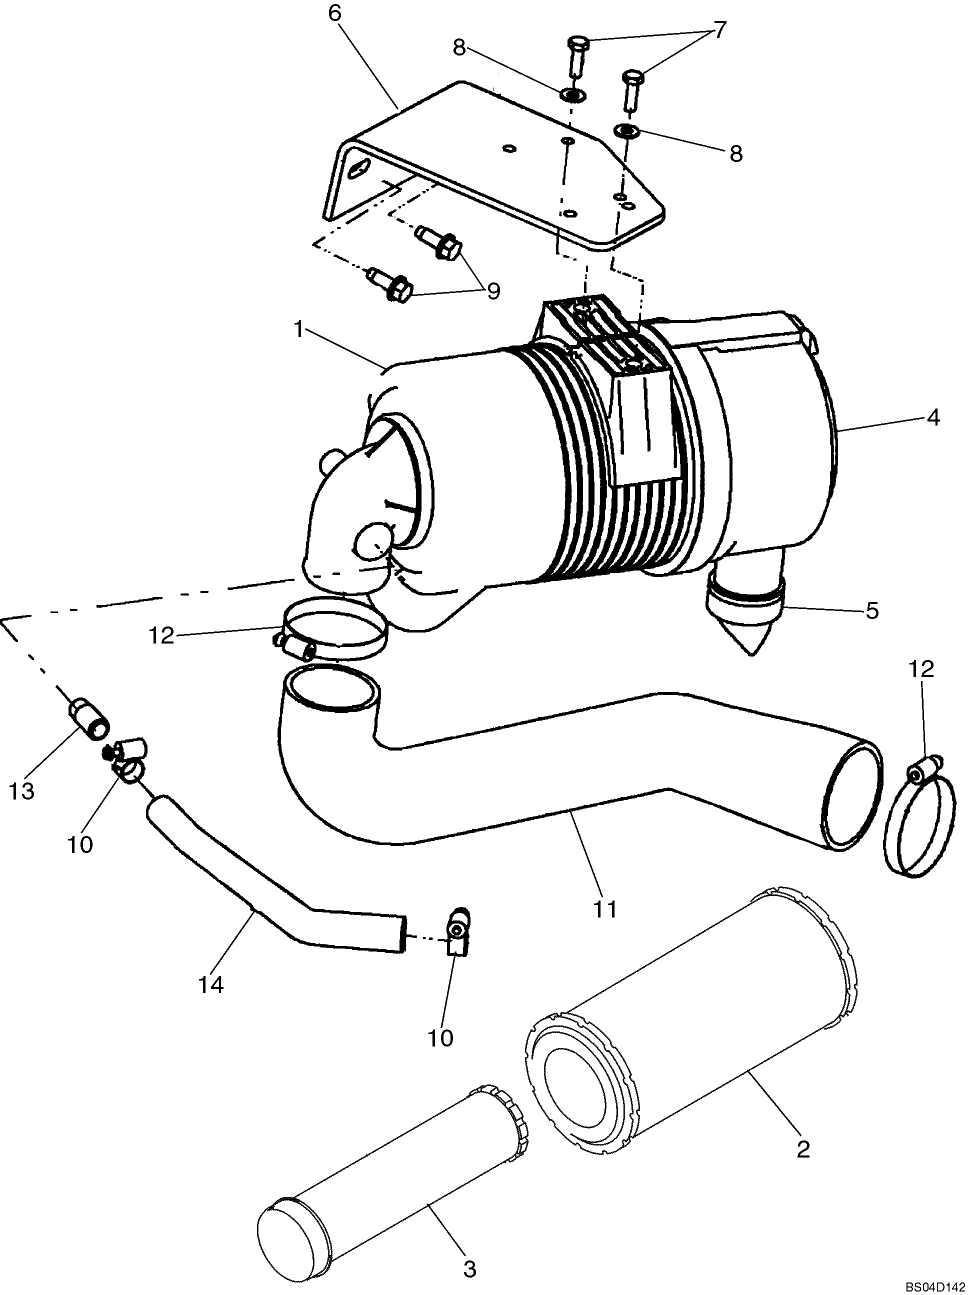 02-04 AIR CLEANER - ENGINE